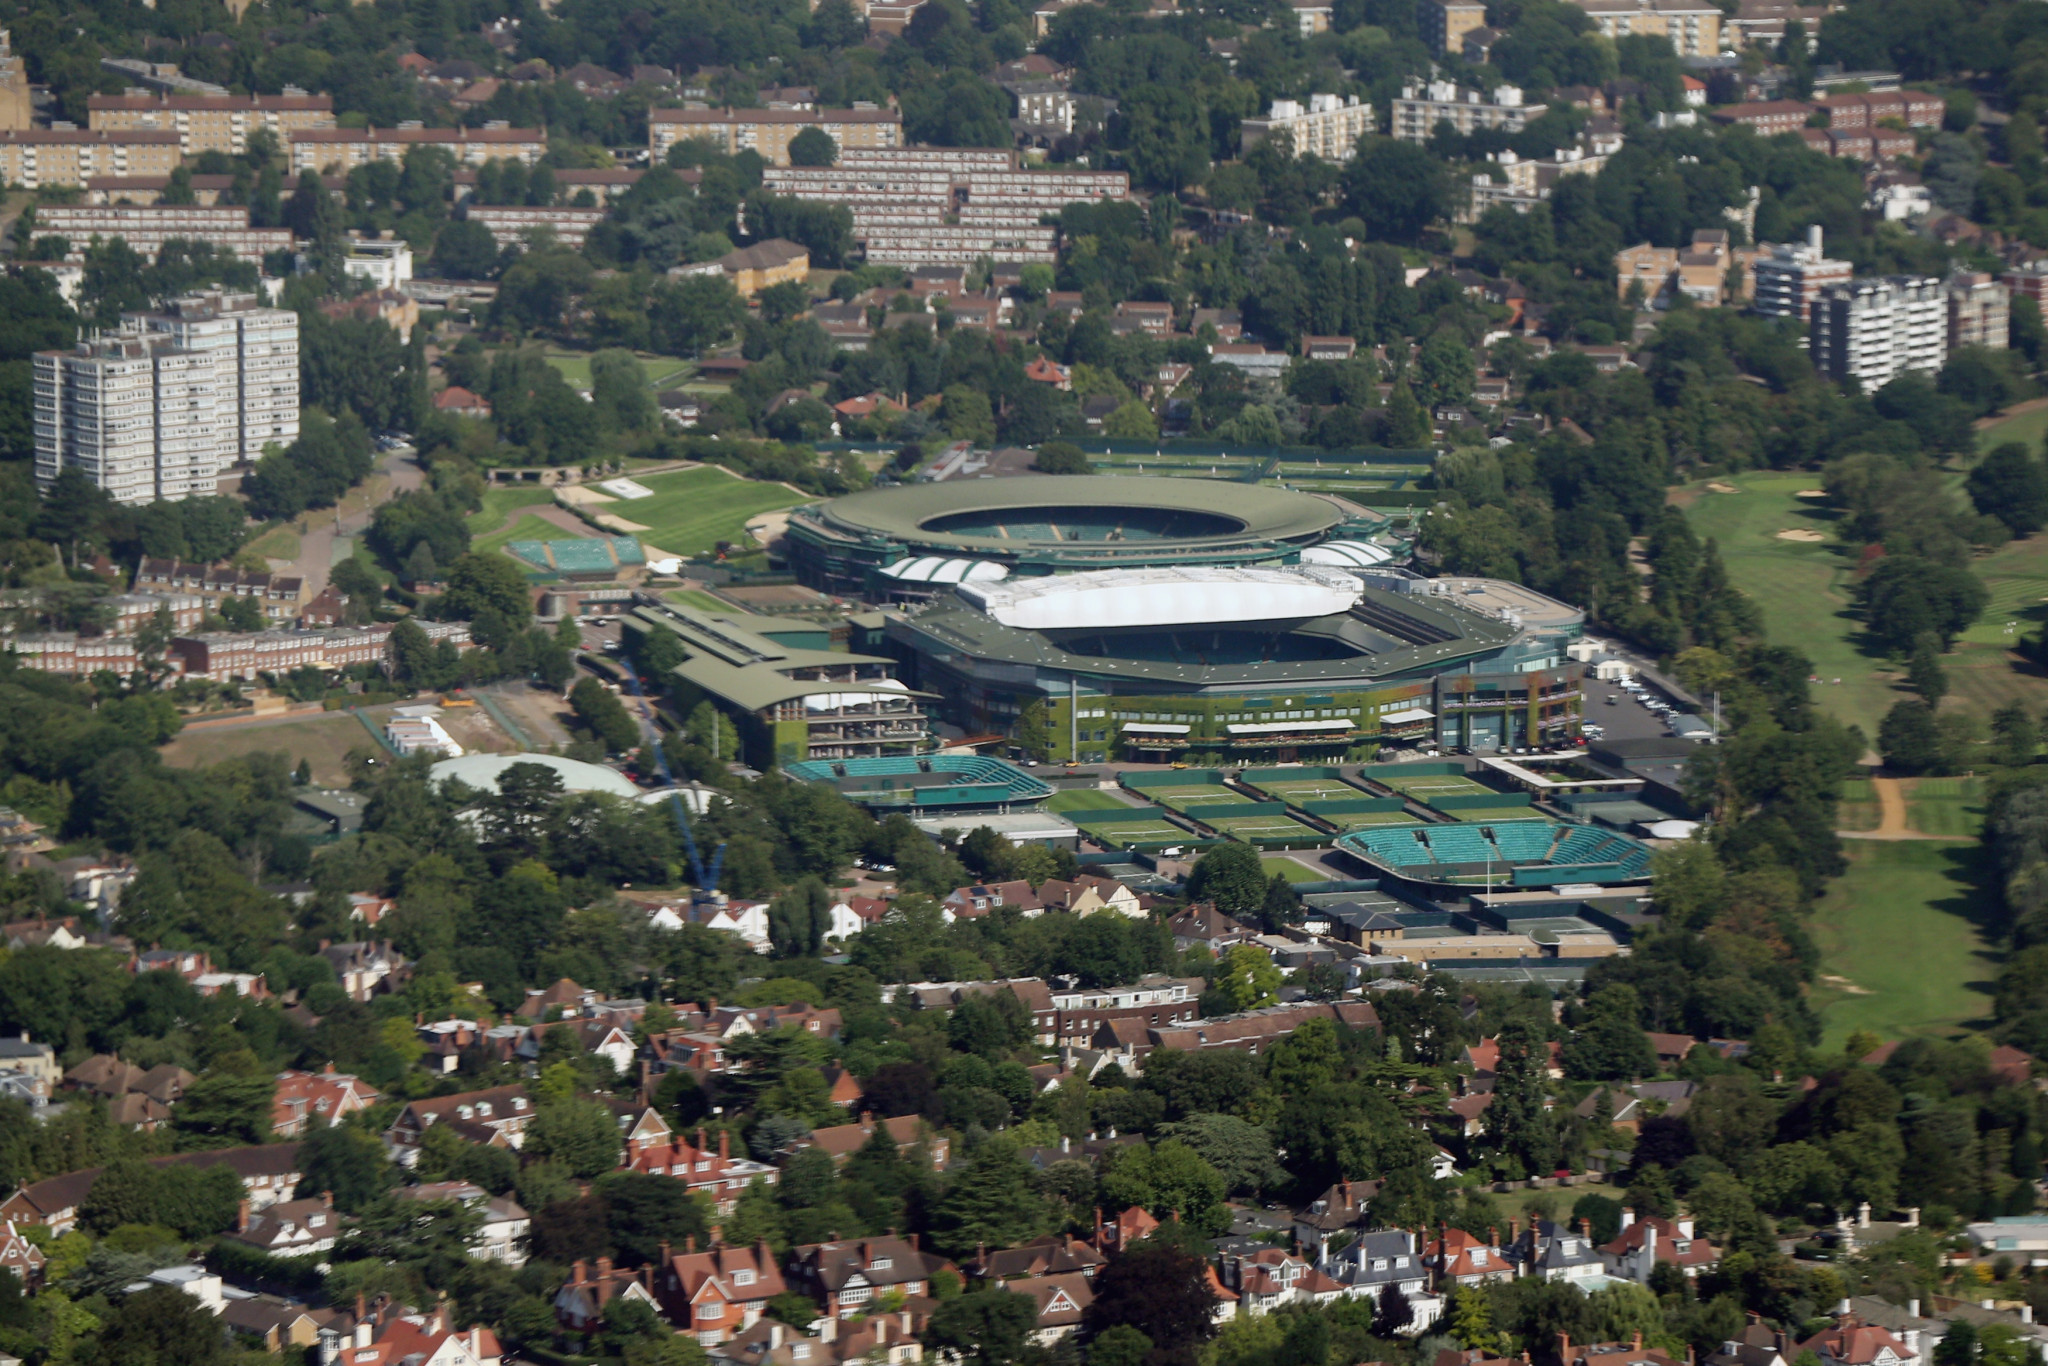 The Wimbledon museum, shop and community sports ground have been closed due to the coronavirus outbreak ©Getty Images